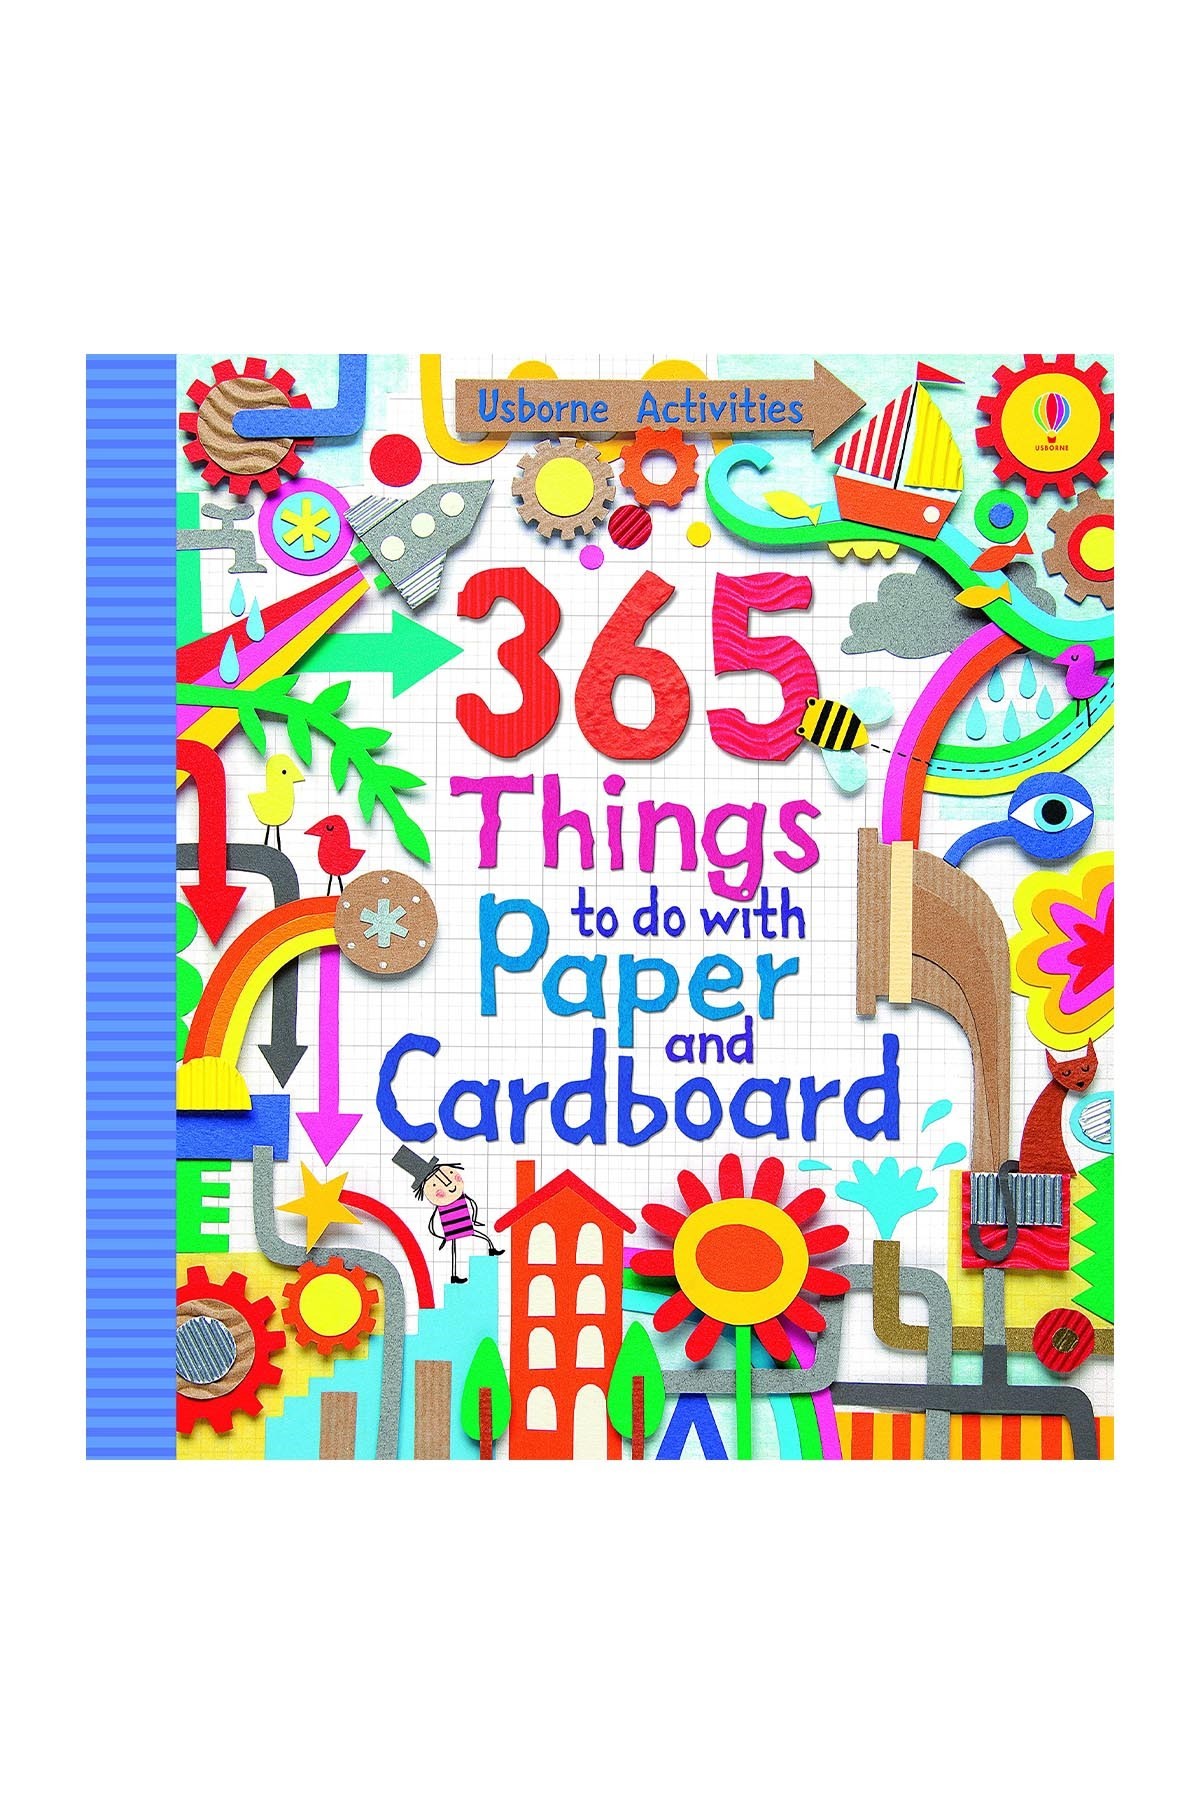 The Usborne 365 Things To Do With Paper